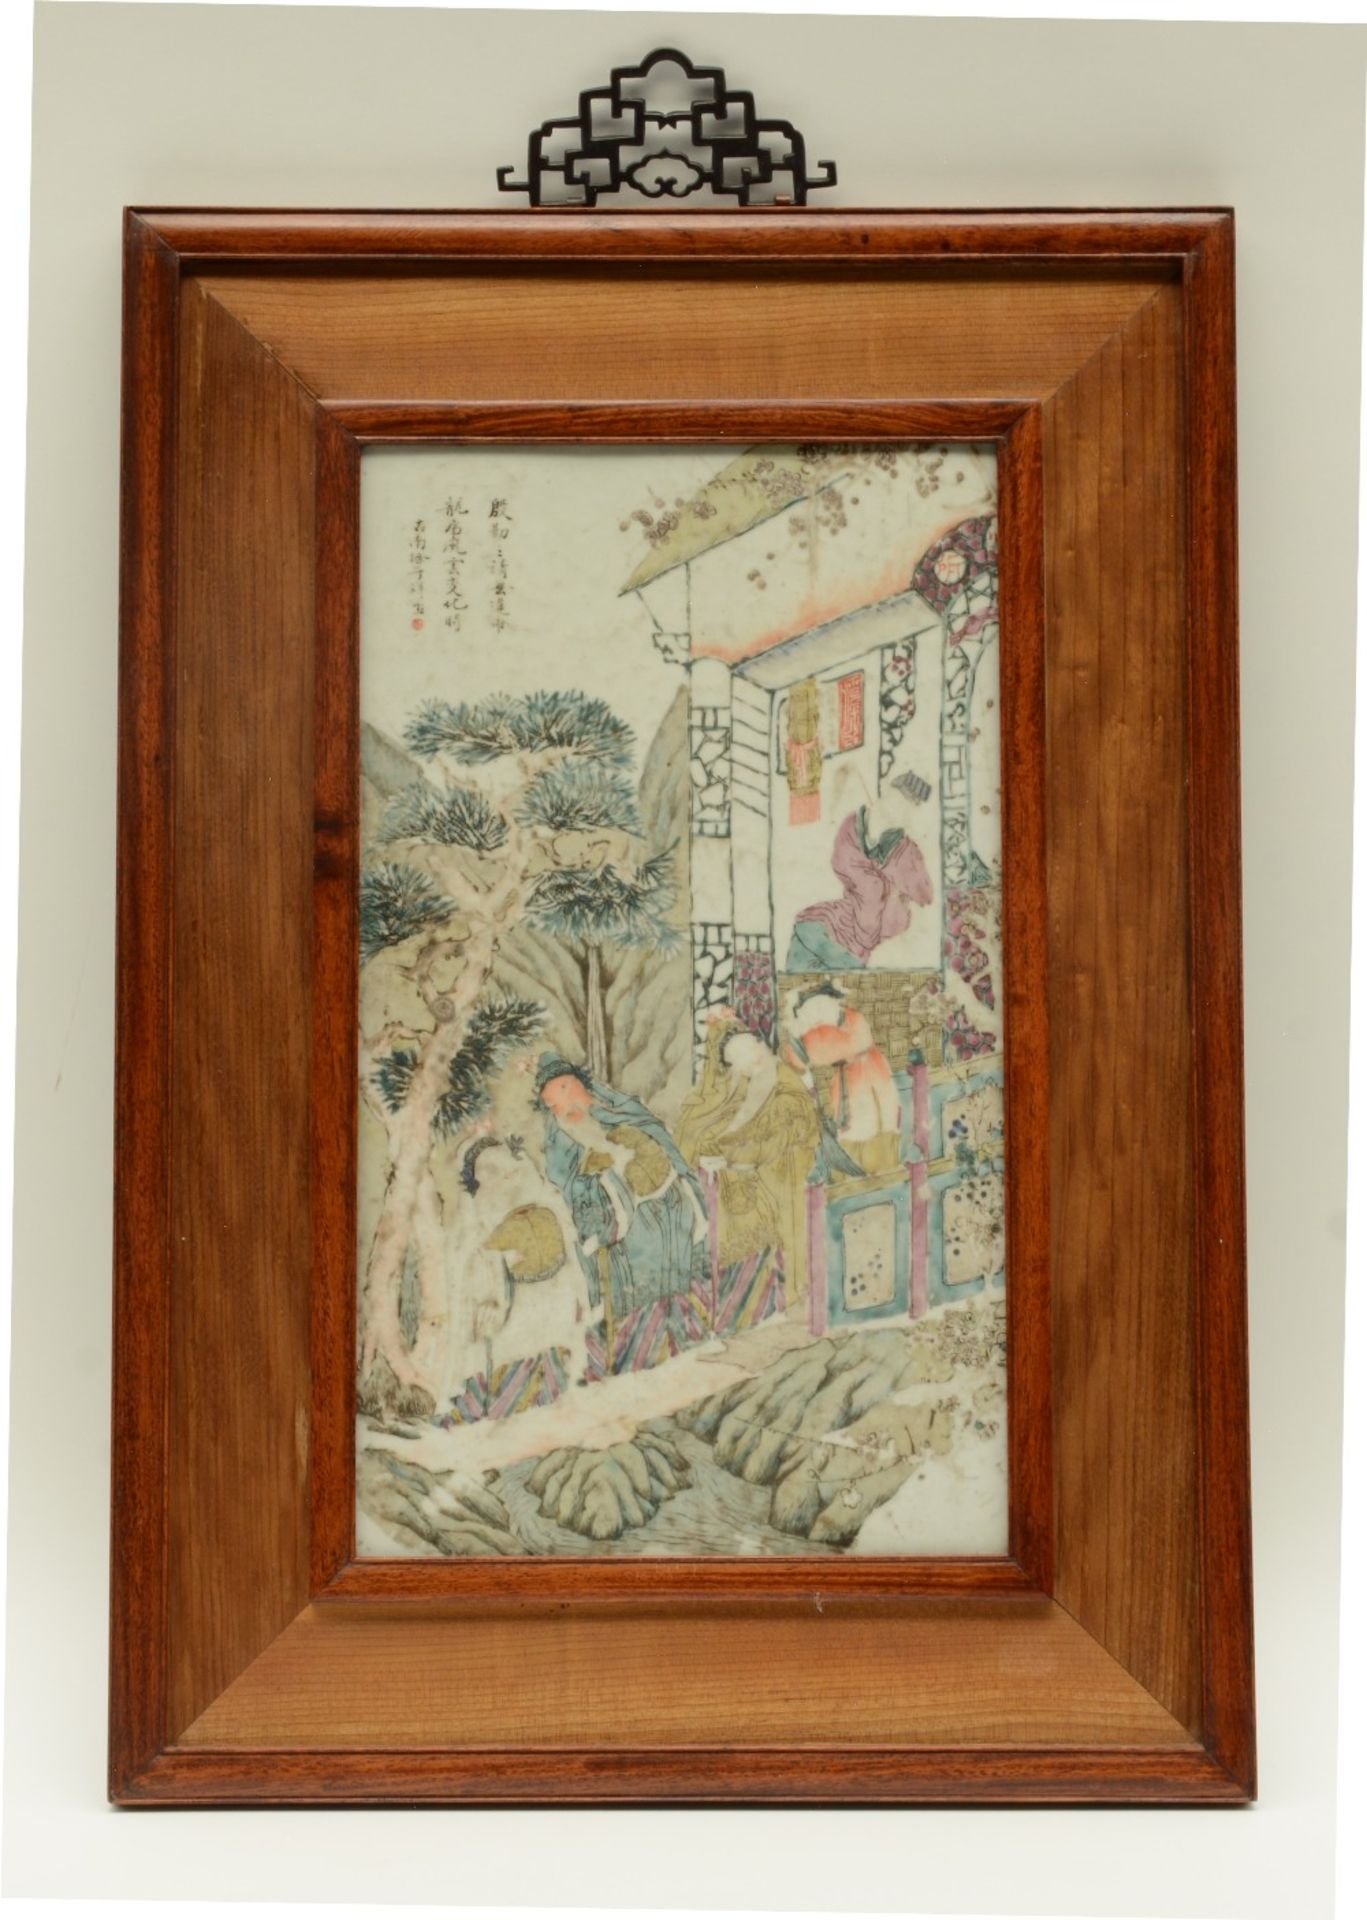 A Chinese polychrome porcelain plaque, decorated with an animated scene, signed by the artist,